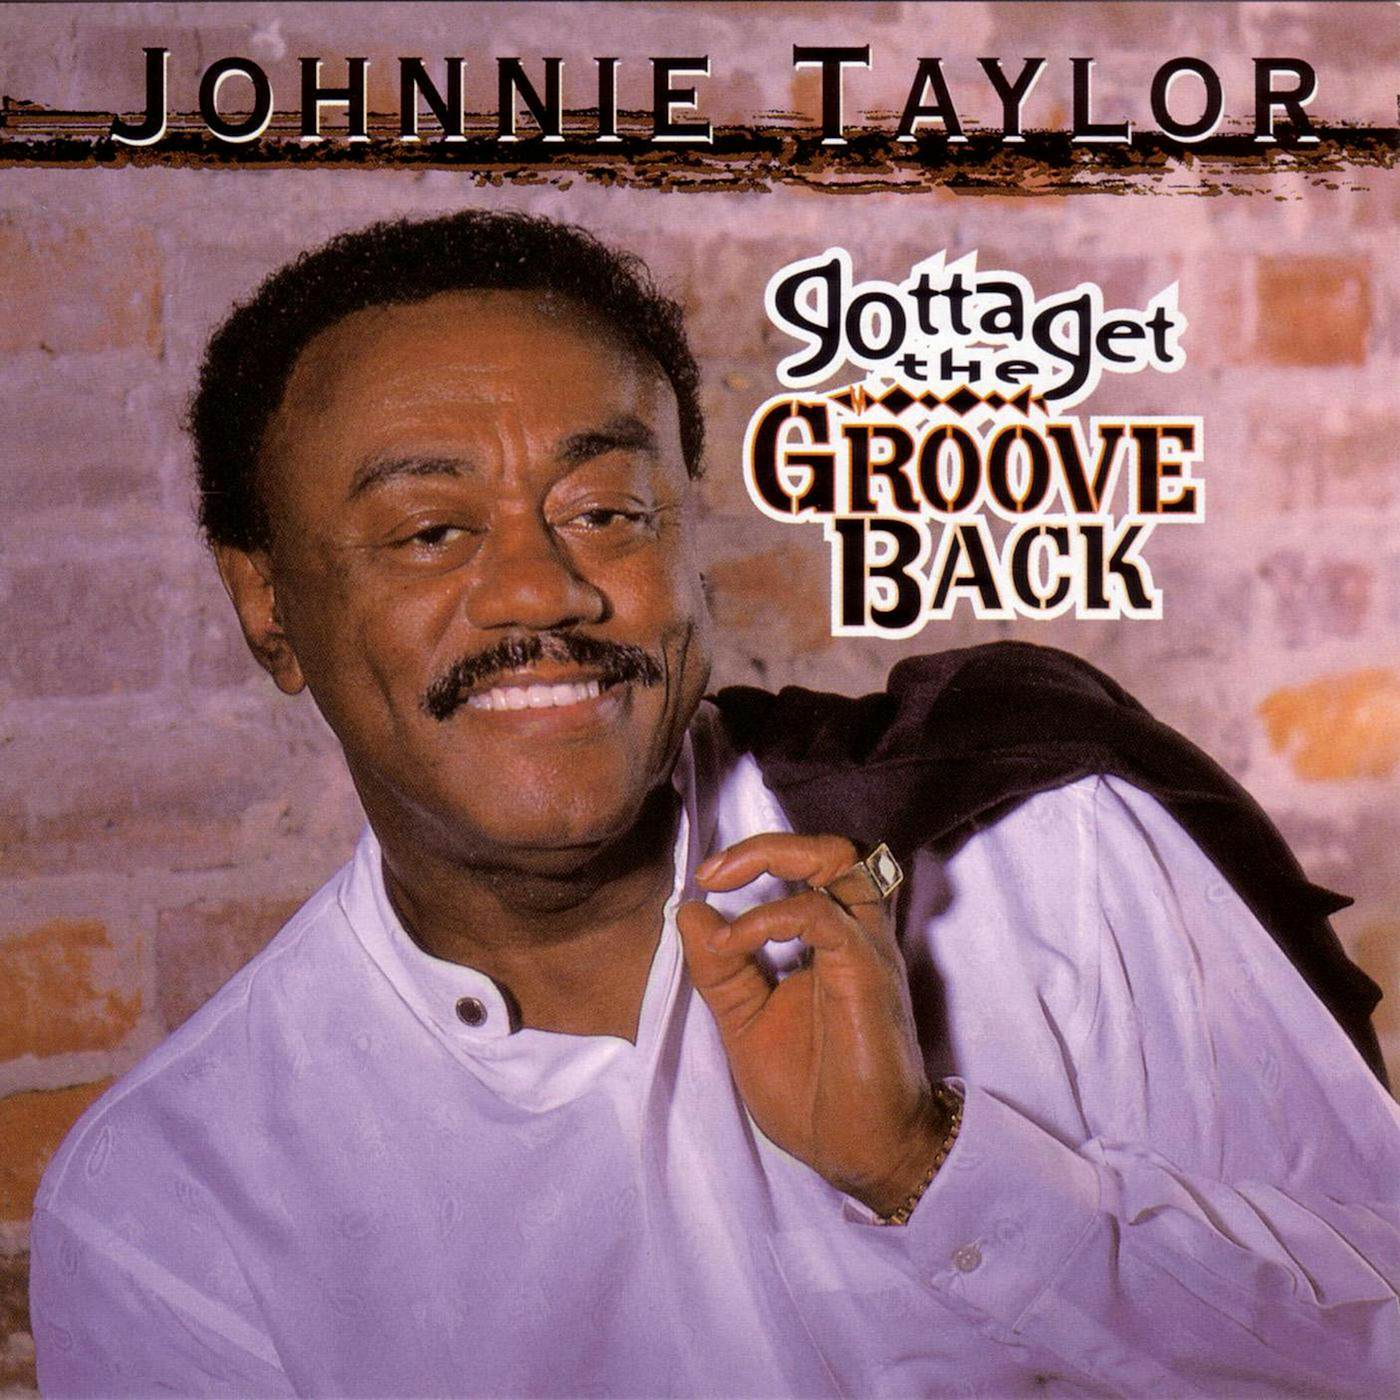 Johnnie Taylor Gotta Get the Groove Back CD